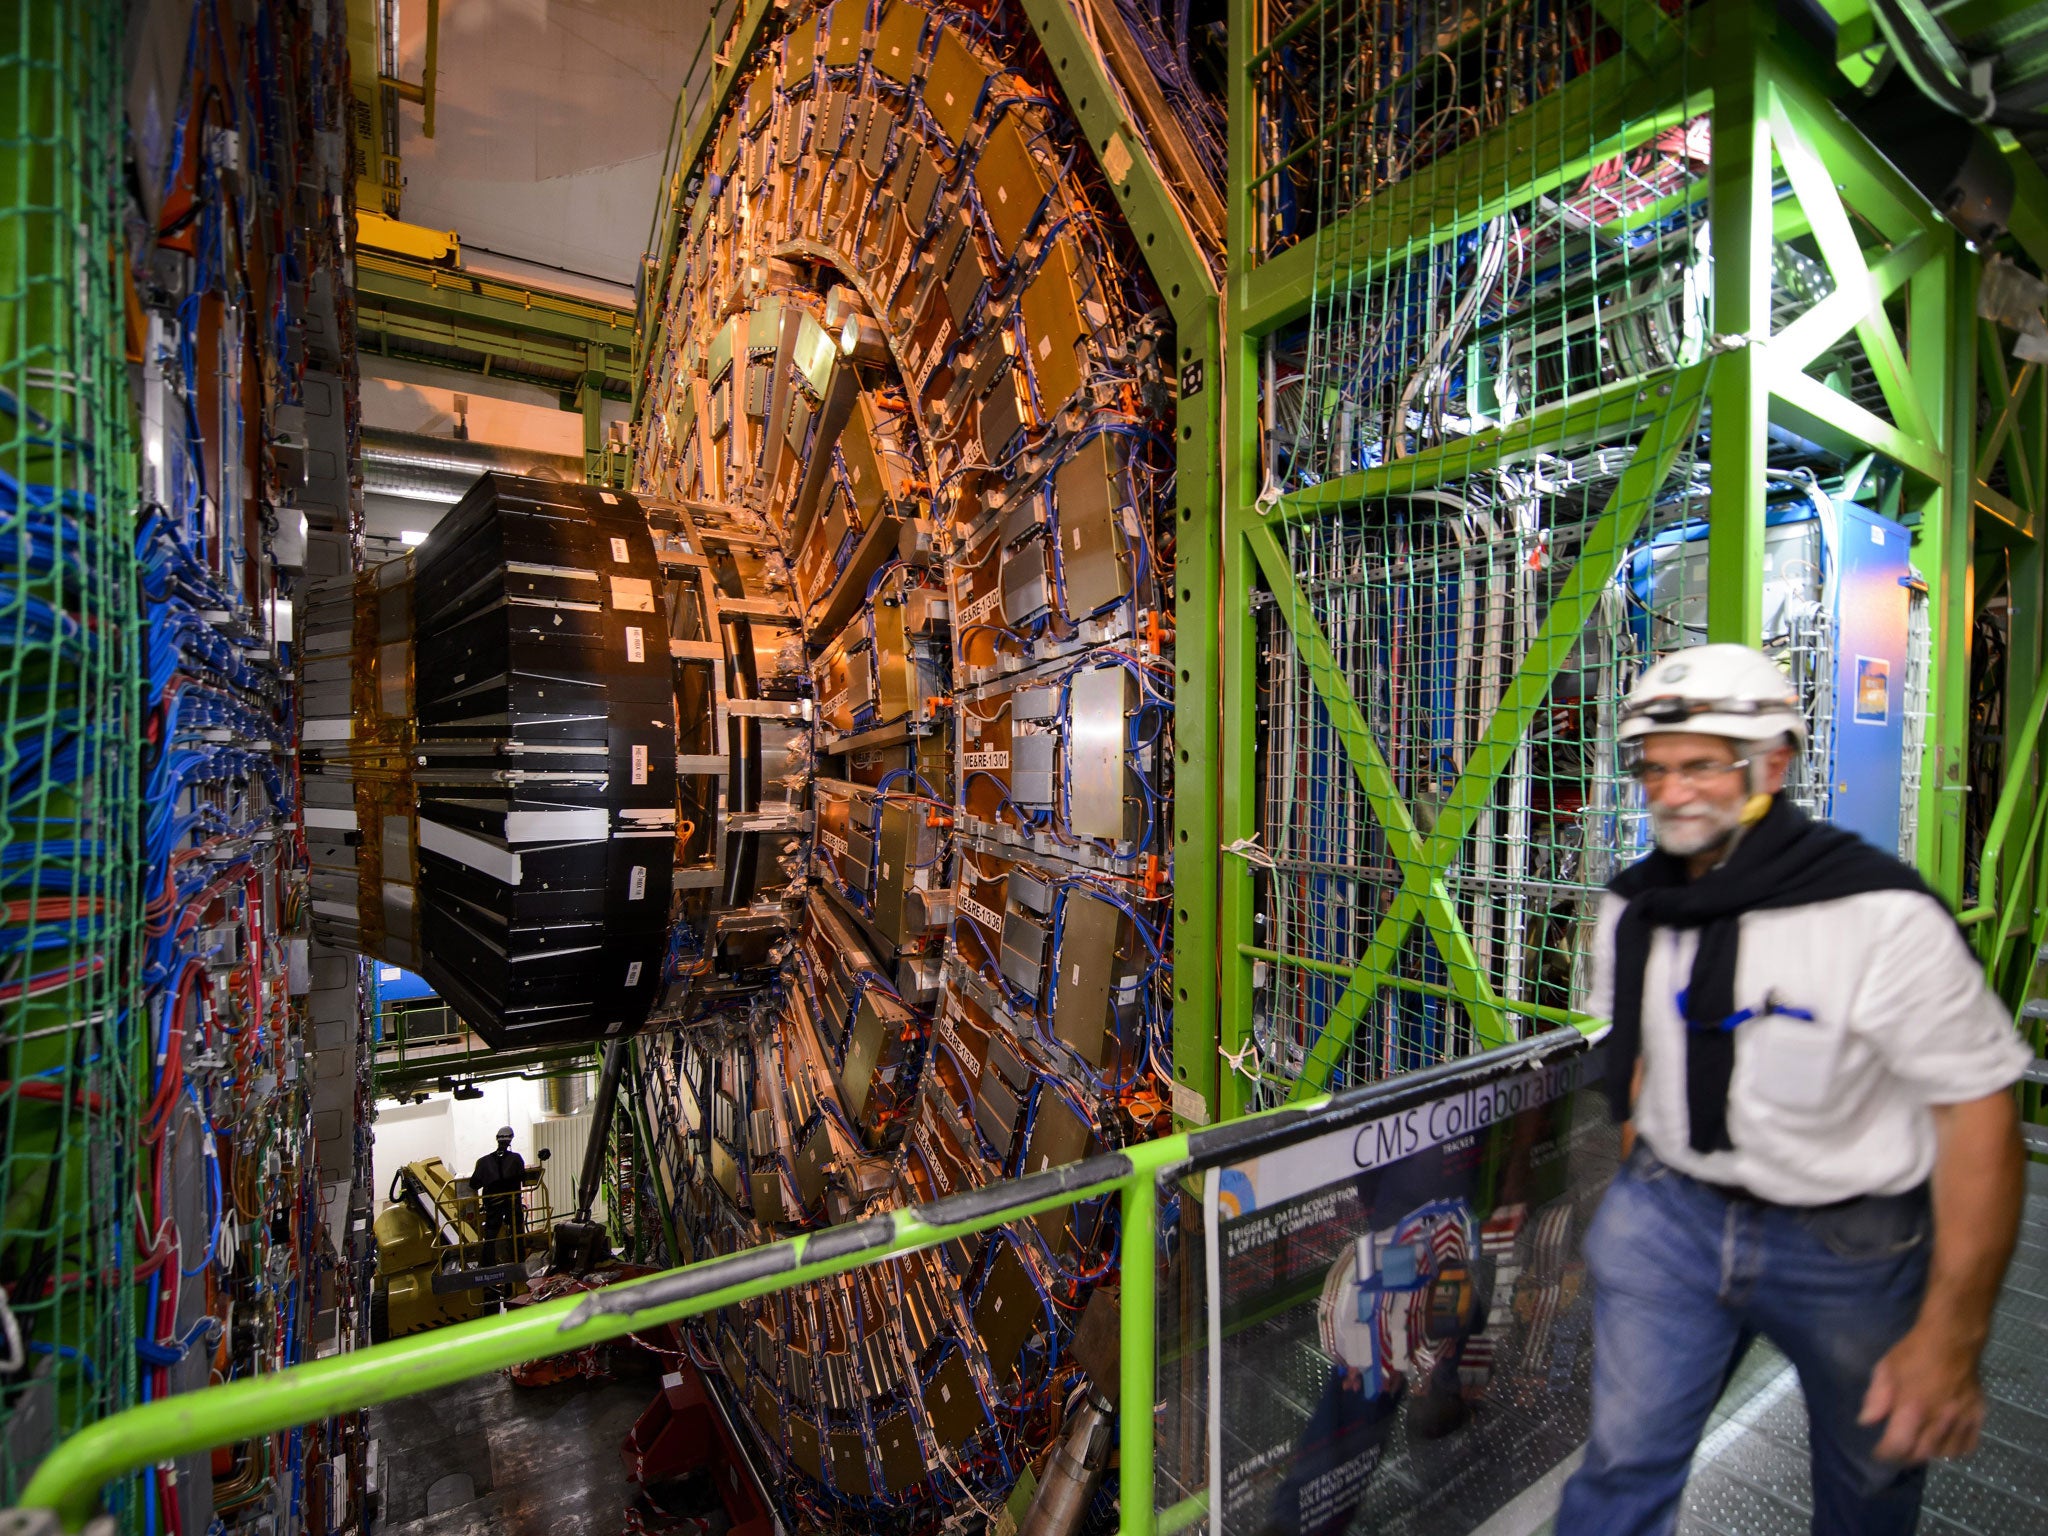 The Large Hadron Collider in Geneva has been successful in its research